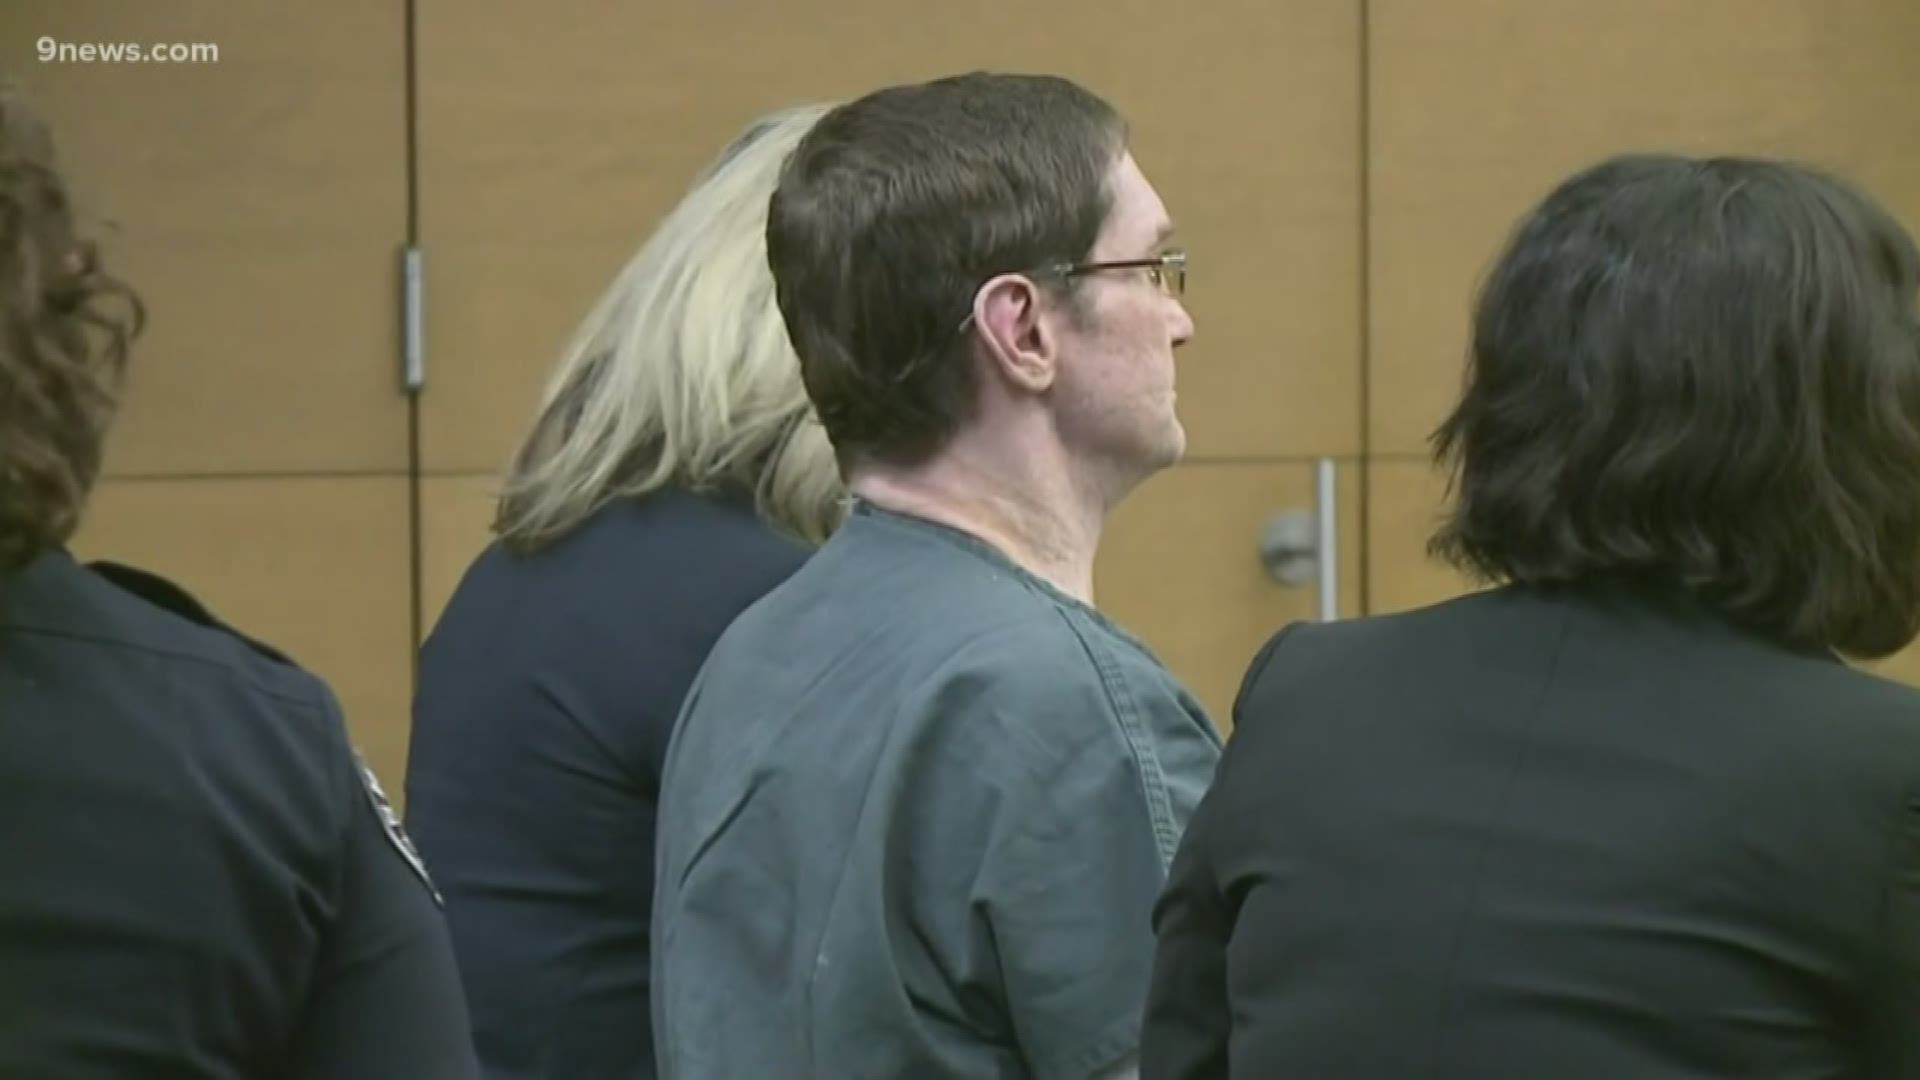 Suspect accused of causing an explosion that leveled multiplex near 4th and Santa Fe pleads not guilty.